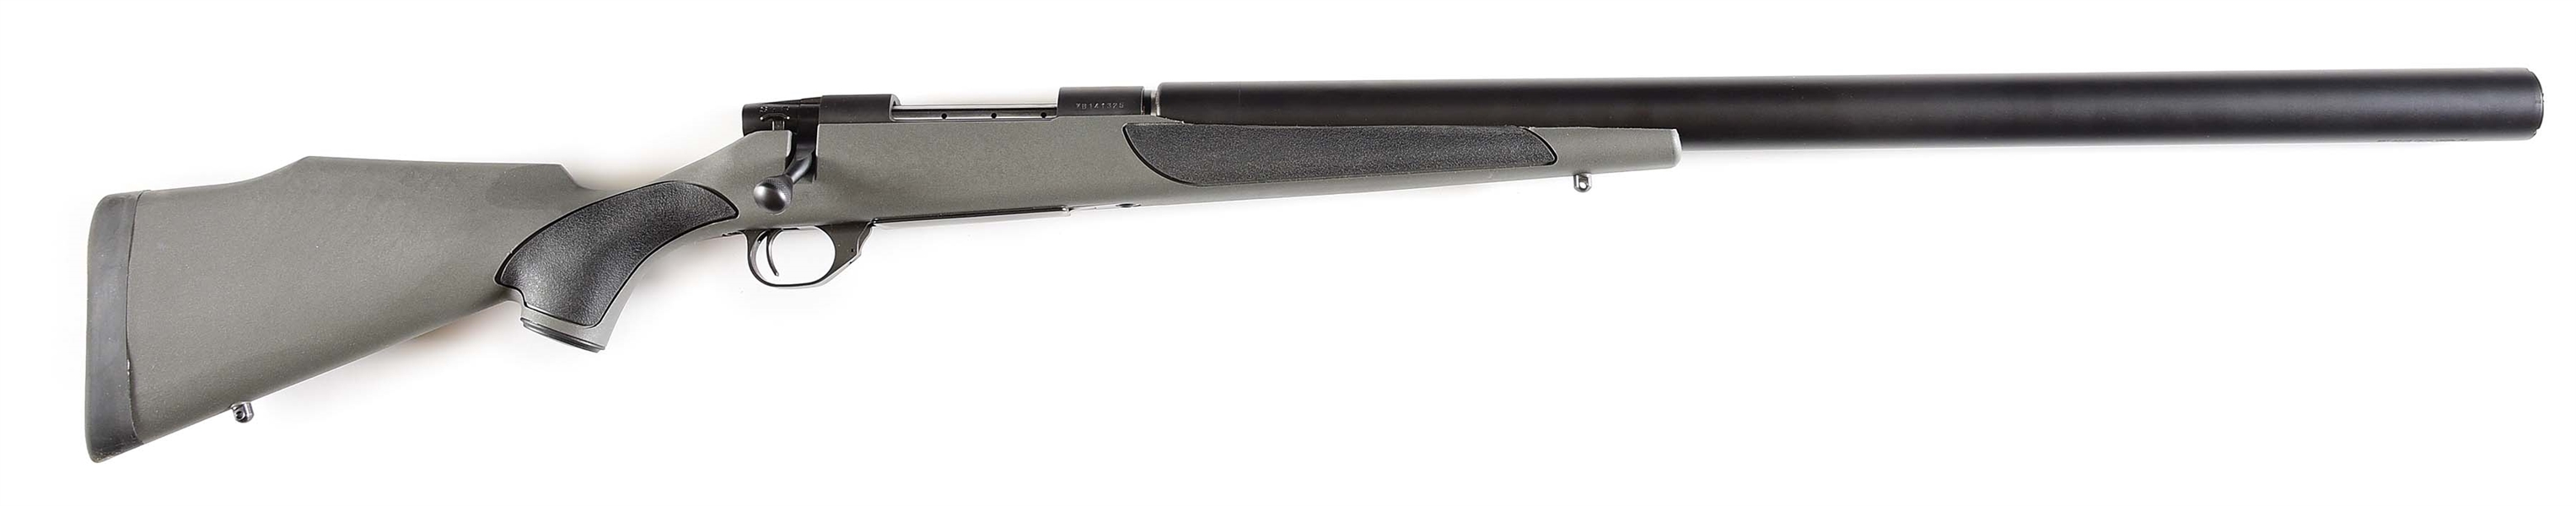 (N) WEATHERBY VANGUARD .257 WEATHERBY MAGNUM BOLT ACTION RIFLE WITH INTEGRAL SRT ARMS SILENCER (SILENCER).